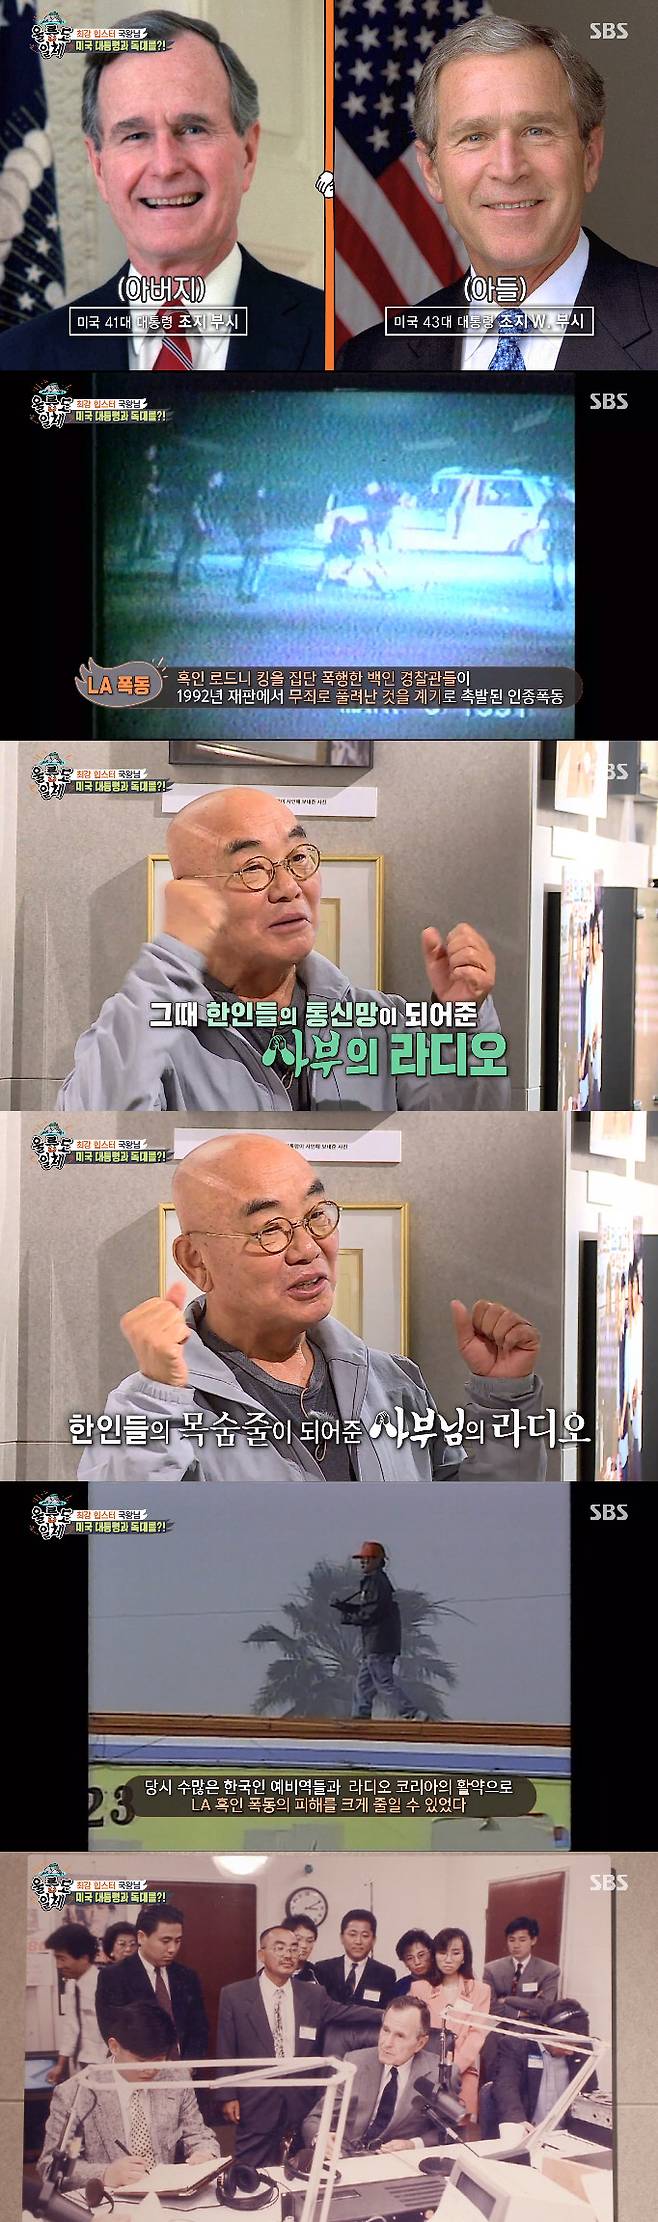 In SBS All The Butlers broadcast on the 13th, Fork Legend Yi Jang-hui, who designed his paradise in Ulleungdo, appeared as master.On this day, the members of All The Butlers were amazed at the sight of the sight as soon as they entered Yi Jang-huis house Ulleung Airport Heaven.The members constantly poured out the admiration of Is this all home, It is so cool here and It is a real heaven.Inside the house were a pond with a backlog, a natural water fountain, and an outdoor performance hall with a seat.Yi Jang-hui said, My favorite place is called heaven. This is heaven. This is the plain water, which is private land, is 13,000 pyeong including mountains.Cha Eun-woo, who heard this, expressed awe that it is the richest master ever, and laughed at Yi Jang-hui.Yi Jang-hui said, I always wondered about the reason why I settled in Ulleungdo.I stayed in the Seoraksan hermit for three months to find what I liked. One day I climbed a hill behind me, and the full moon rose.The moonlight was shining through the Searaksan Valley, and it seemed like a fairy would come out, and for the first time I felt Oh! Thats my favorite moment.What I liked was more natural than music, money, and honor. The Ulleung Airport Heaven Art Center, which was presented to Yi Jang-hui in the country, was released.The Art Center featured hits by Yi Jang-hui and photos taken during the United States of America life.Yi Jang-hui, who saw a picture of Mustache, said, I was riding a motorcycle and I was flying because of an accident.Then I went to the hospital and found my teeth stuck in my lips. The doctor asked me to raise Mustache to cover my face.I started to raise Mustache from then on, he said of the story about trademark Mustache.Yi Jang-hui said: The President of America (United States of America, 41st President) was in our companys editorial office.The whole of LA had become lawless, and a lot of one stores were involved in riots, and one stores were damaged by riots.Thats when our radio helped with Ones communication network, and the Ones who heard it united and went to help, he said.At that time, the Korean reserves and Radio Korea were able to greatly reduce the damage of the black riot in Los Angeles.Yi Jang-hui then released a photo of President George Bush, saying he visited the station and broadcast it.The members of All The Butlers who watched the photo admired that I think it is a presidential aide when I look at the picture and I feel like I am not pushed in a fight.